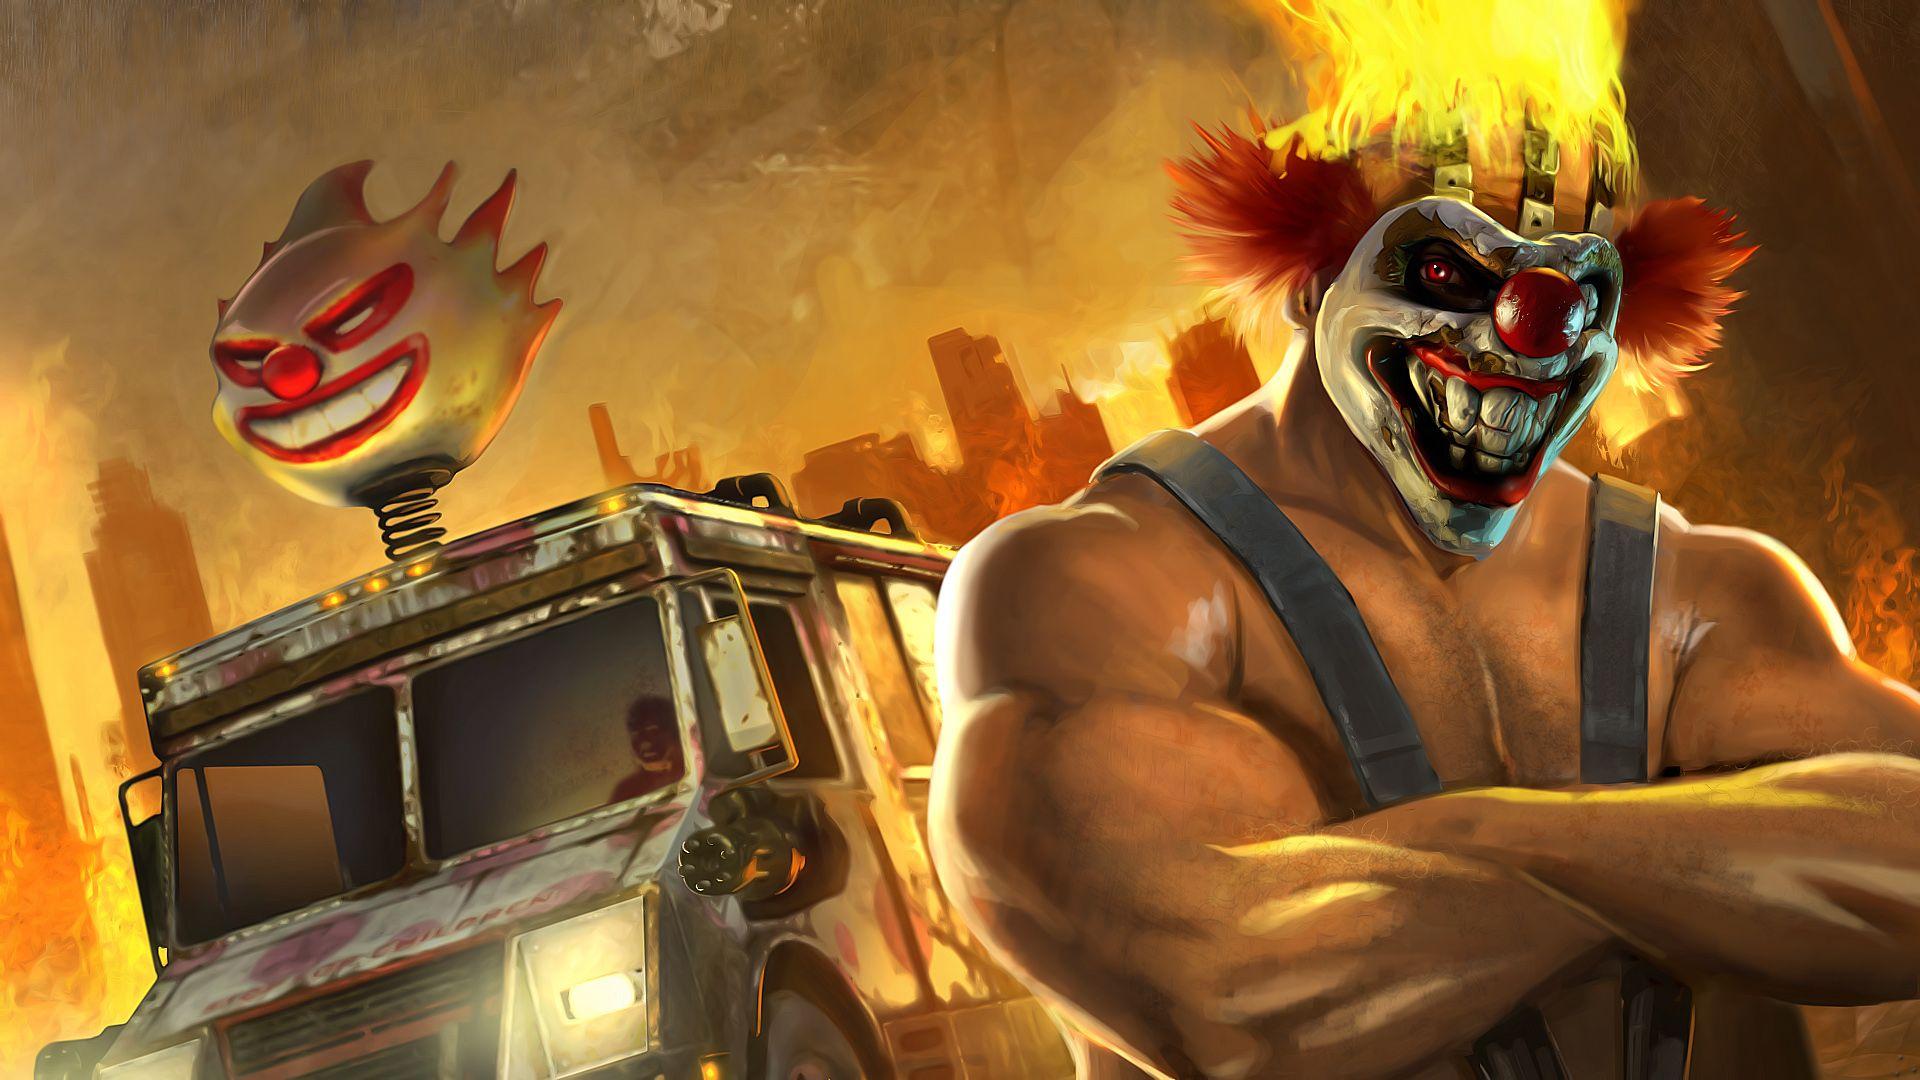 13093301881080ptwisted Metal Wallpaper Hd. Twisted